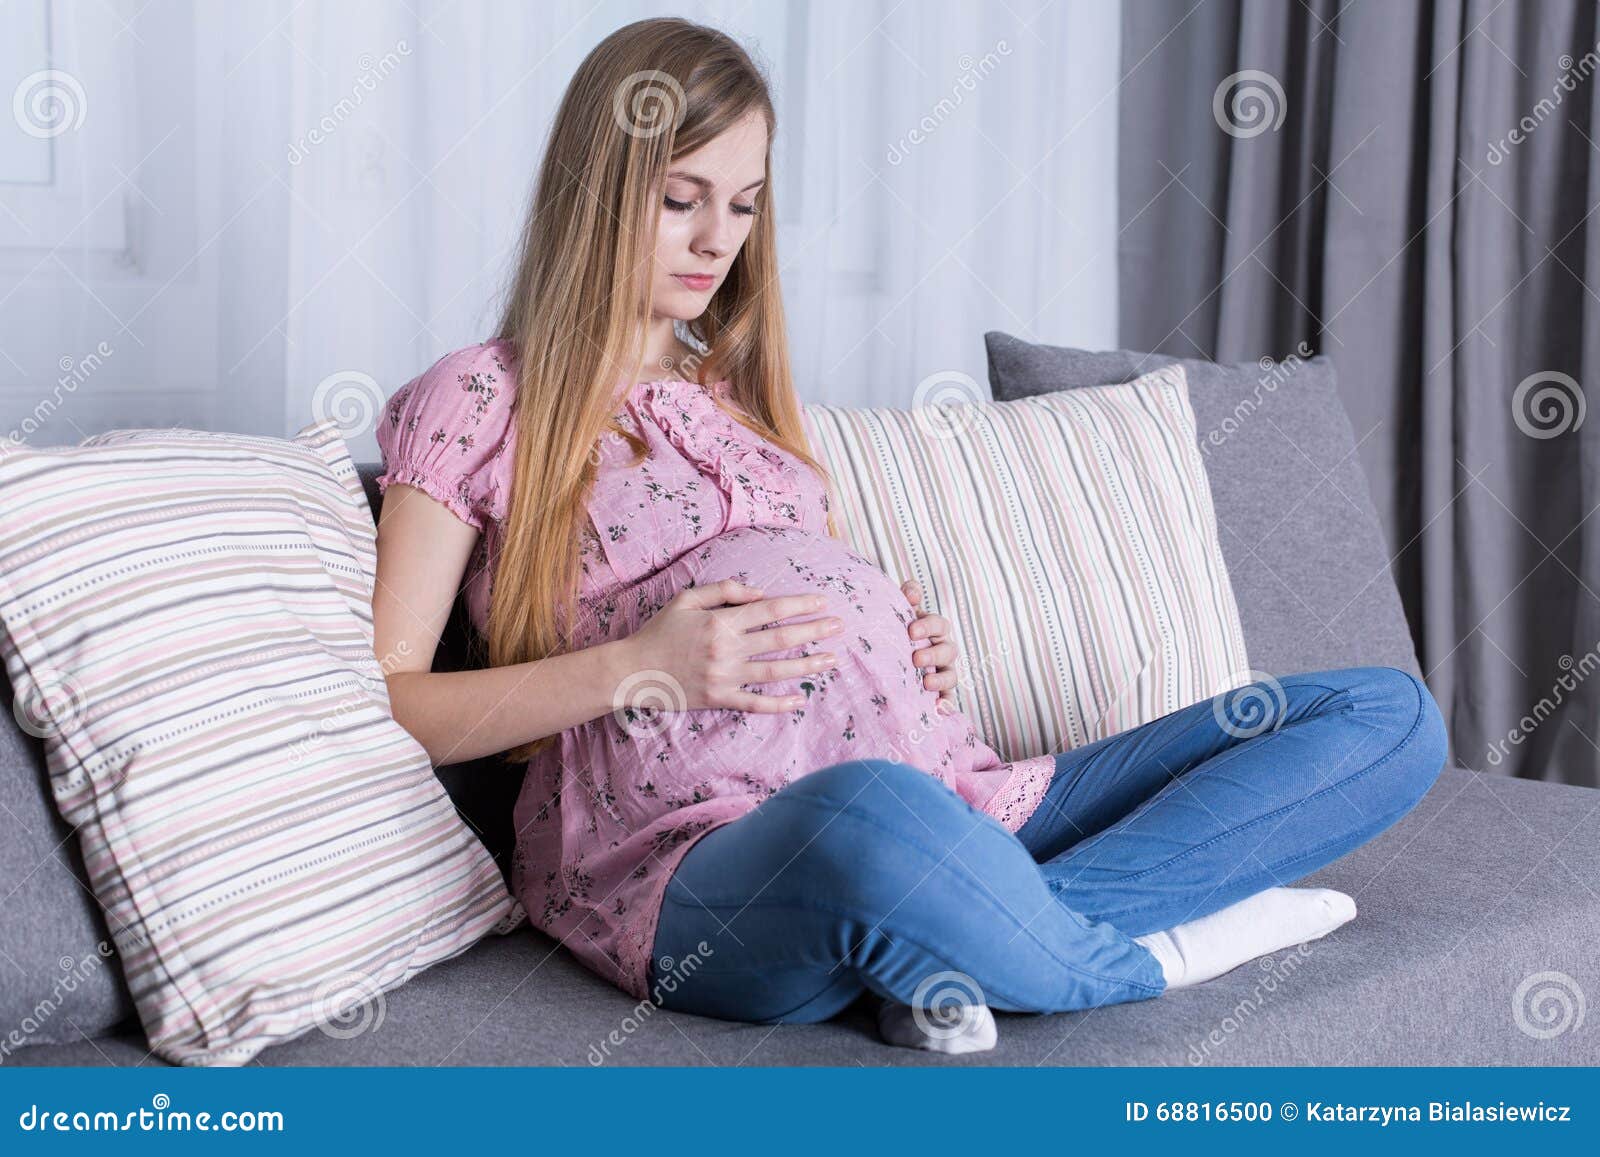 young girl expecting childbirth soon